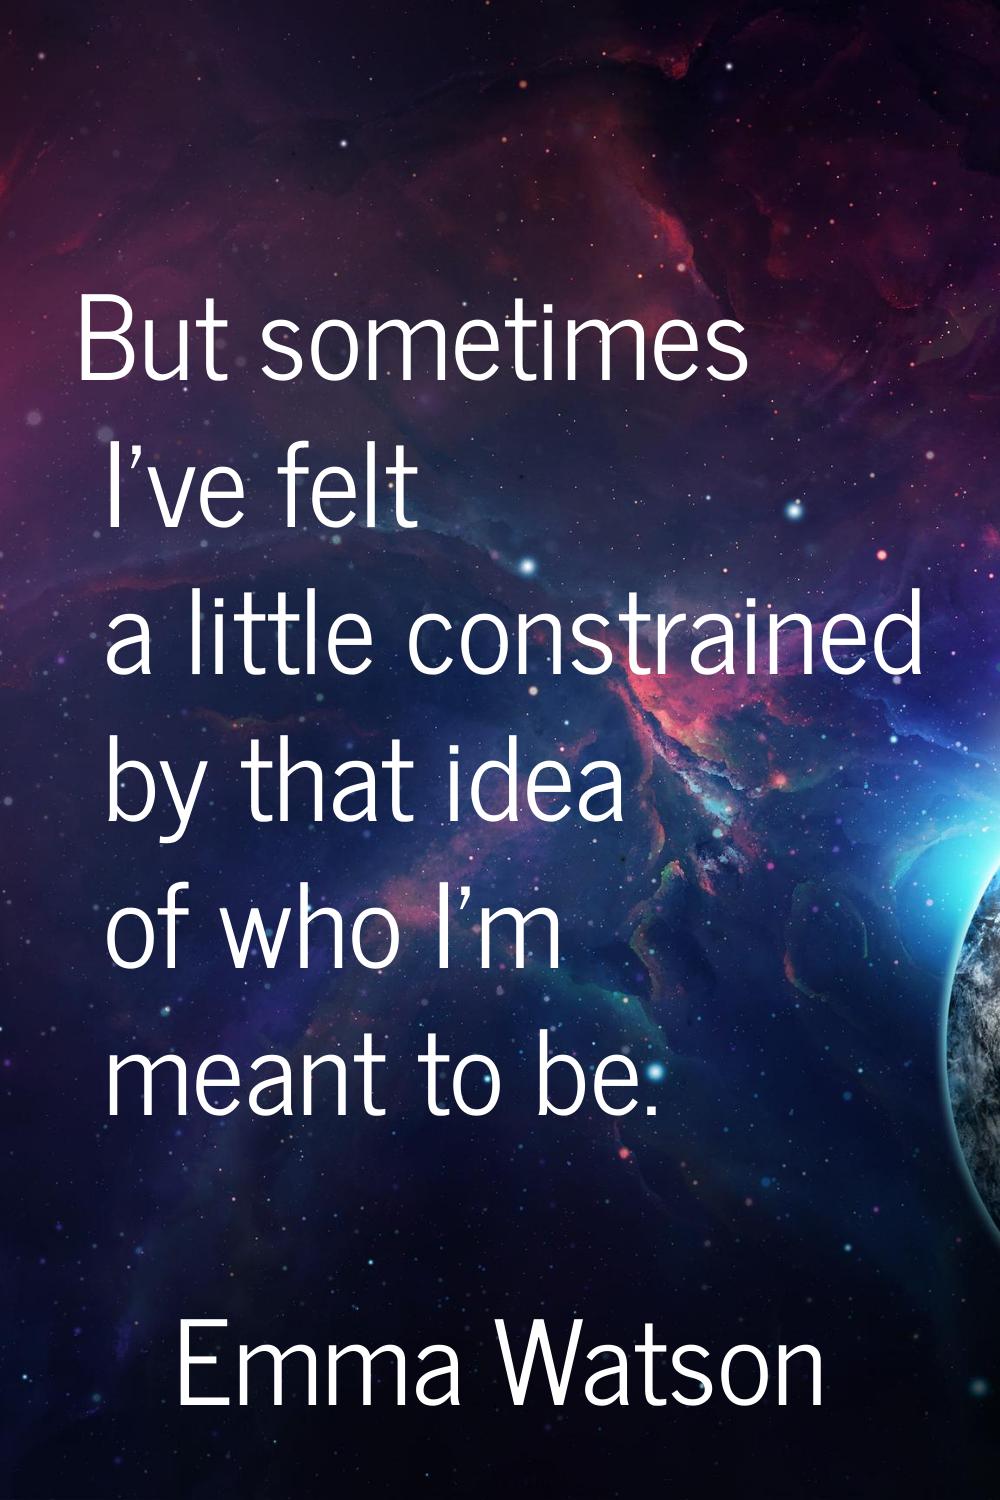 But sometimes I've felt a little constrained by that idea of who I'm meant to be.